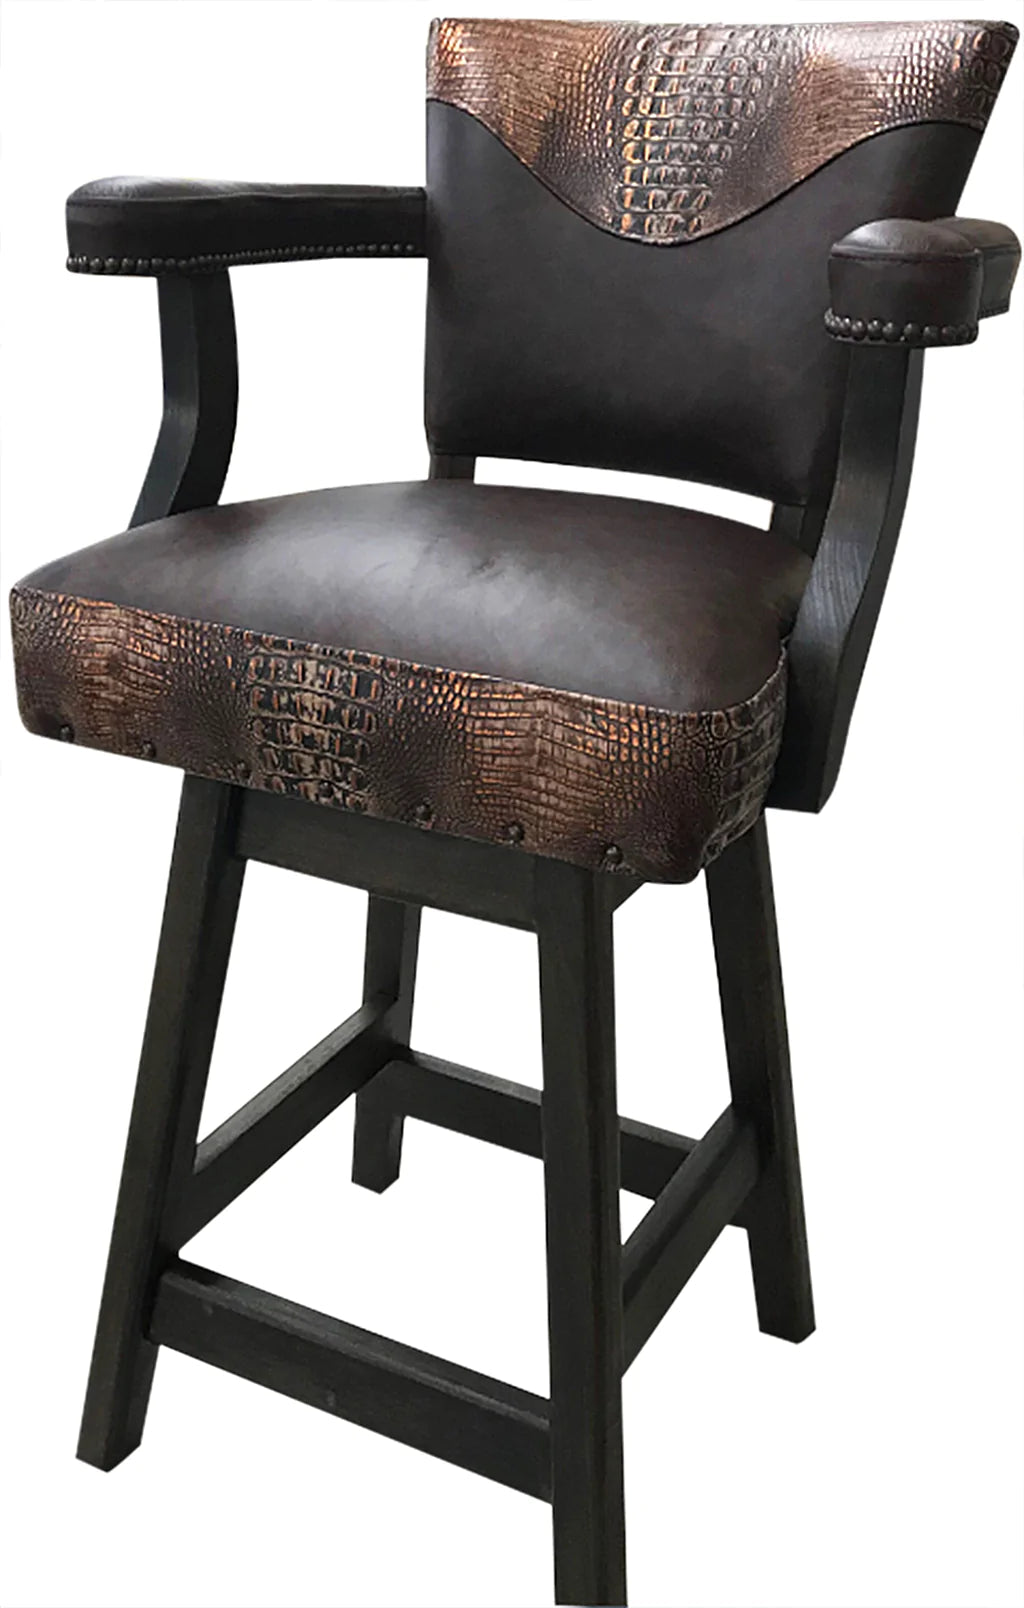 Cave Creek Distressed Leather with Copper accented Gator Counter Height Barstool